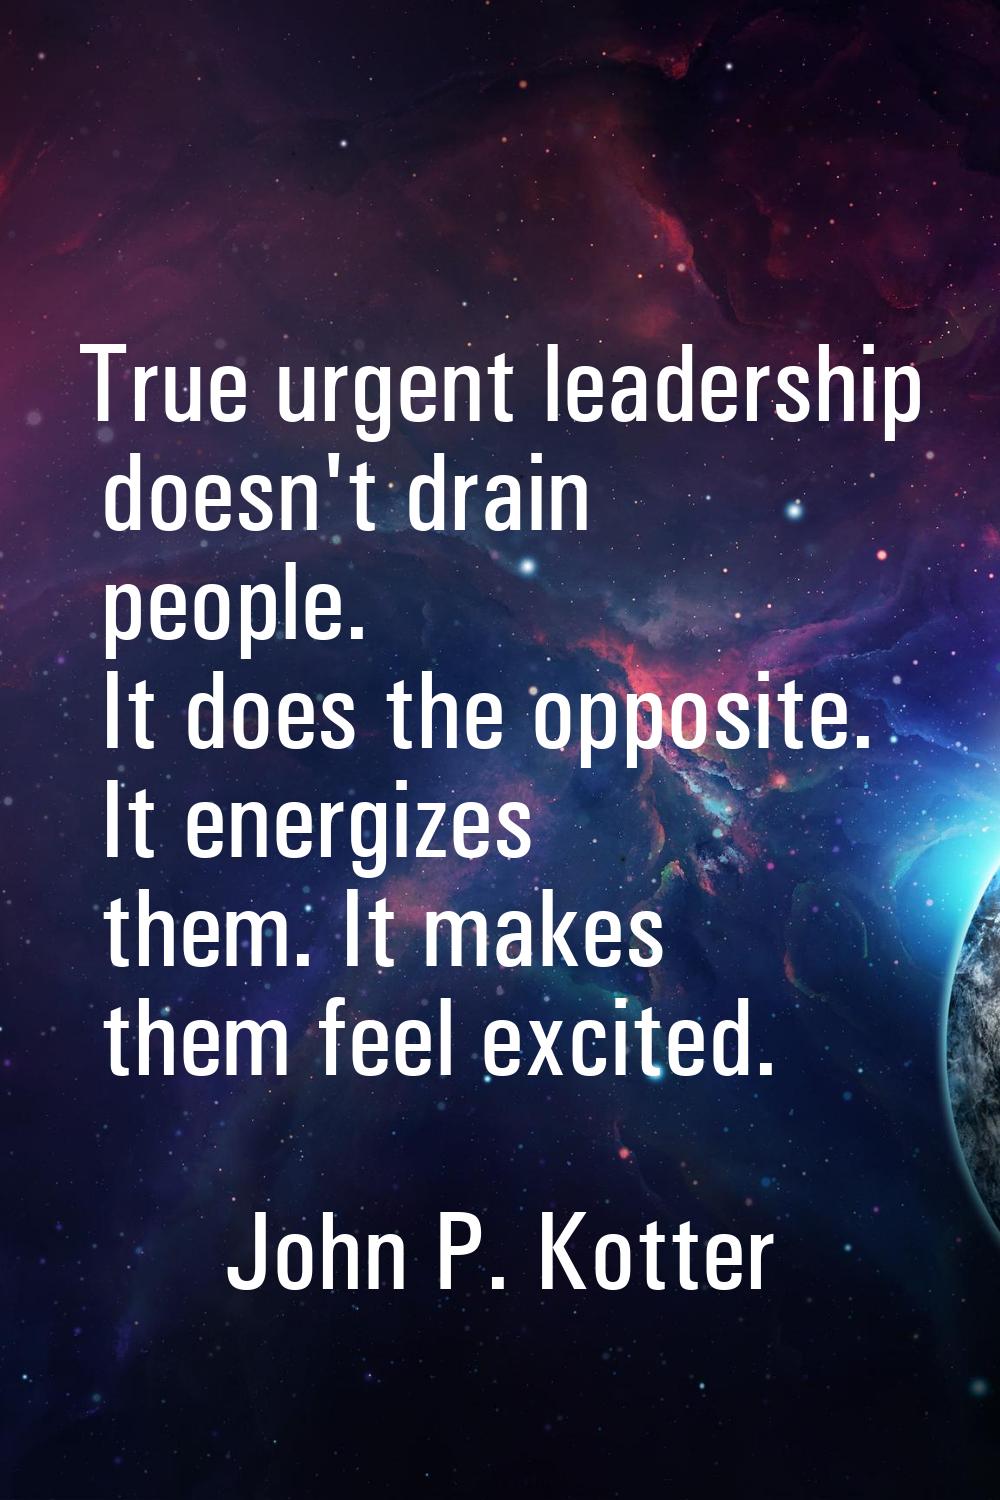 True urgent leadership doesn't drain people. It does the opposite. It energizes them. It makes them